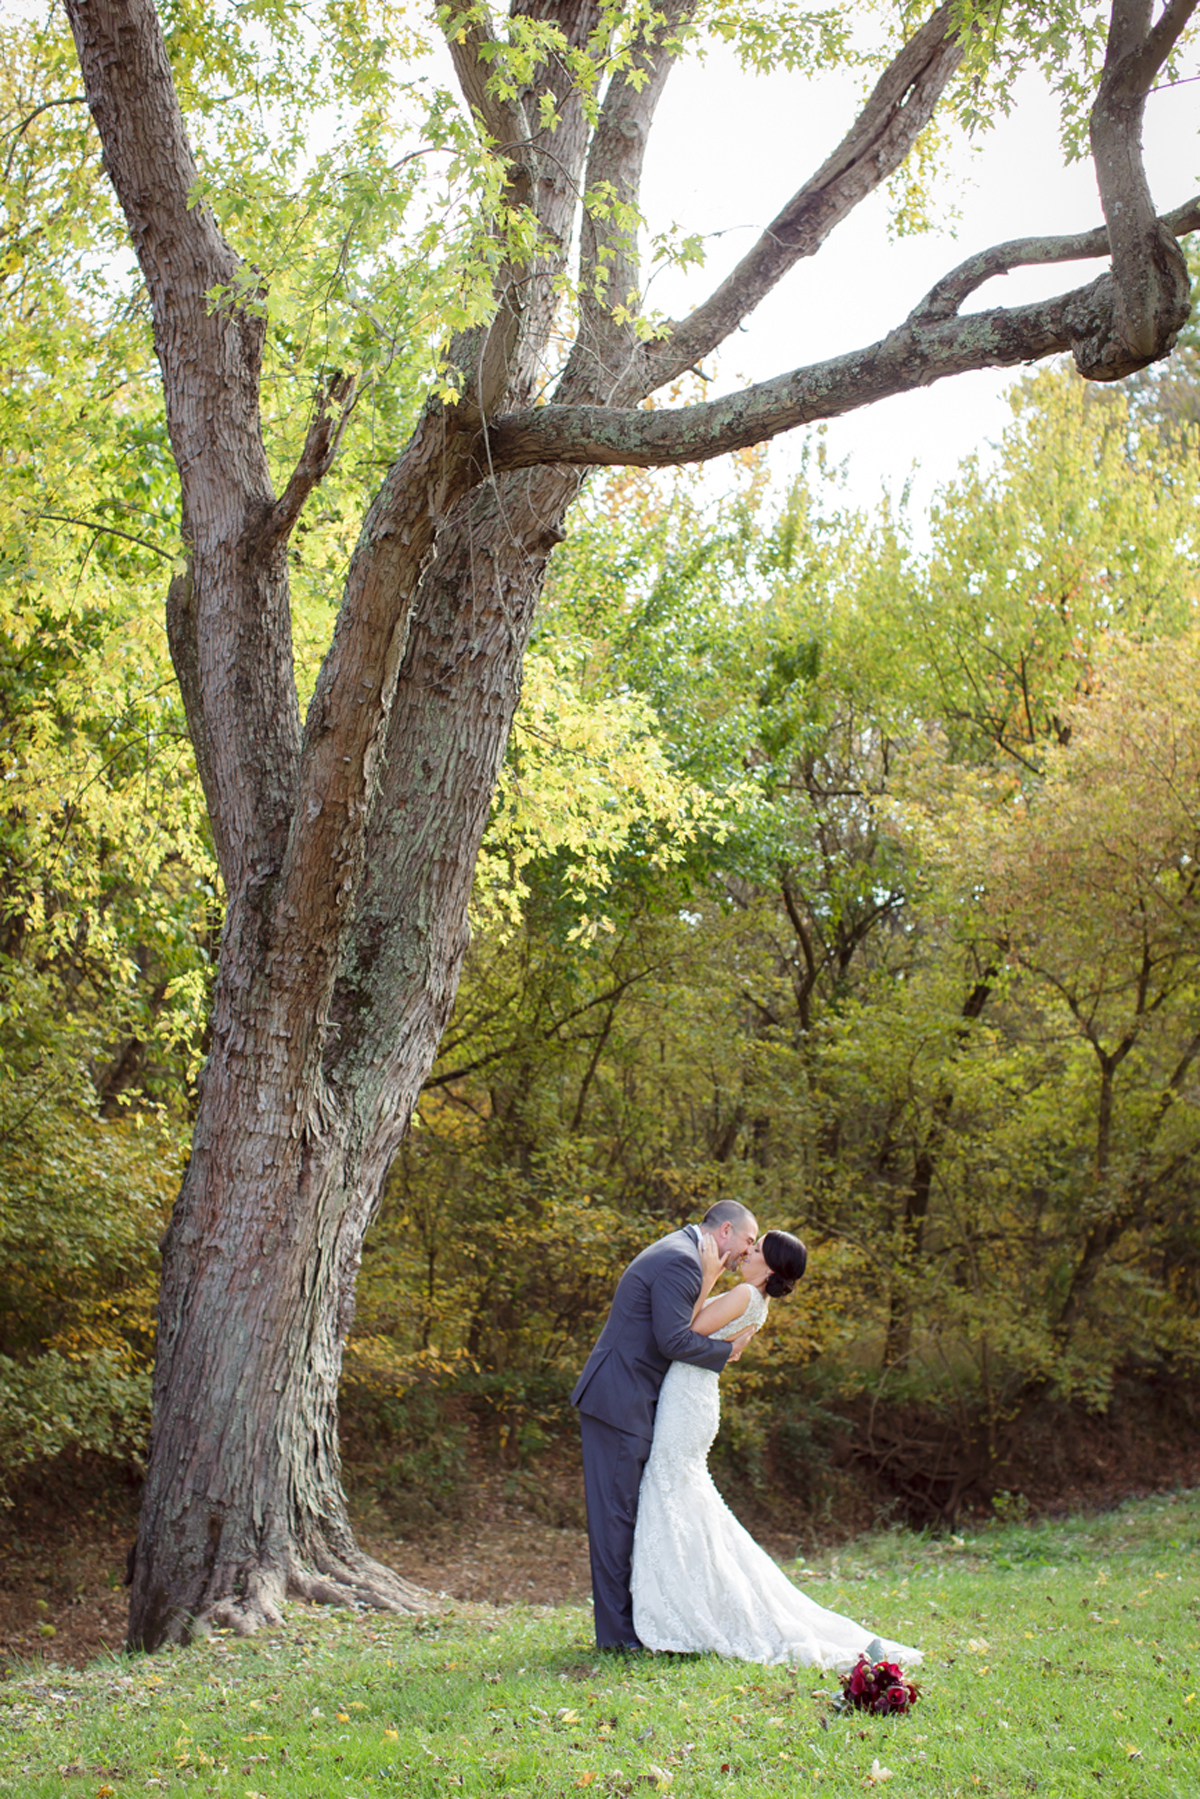 Wedding Photos Photographer Berks County PA Vineyard Outside Out